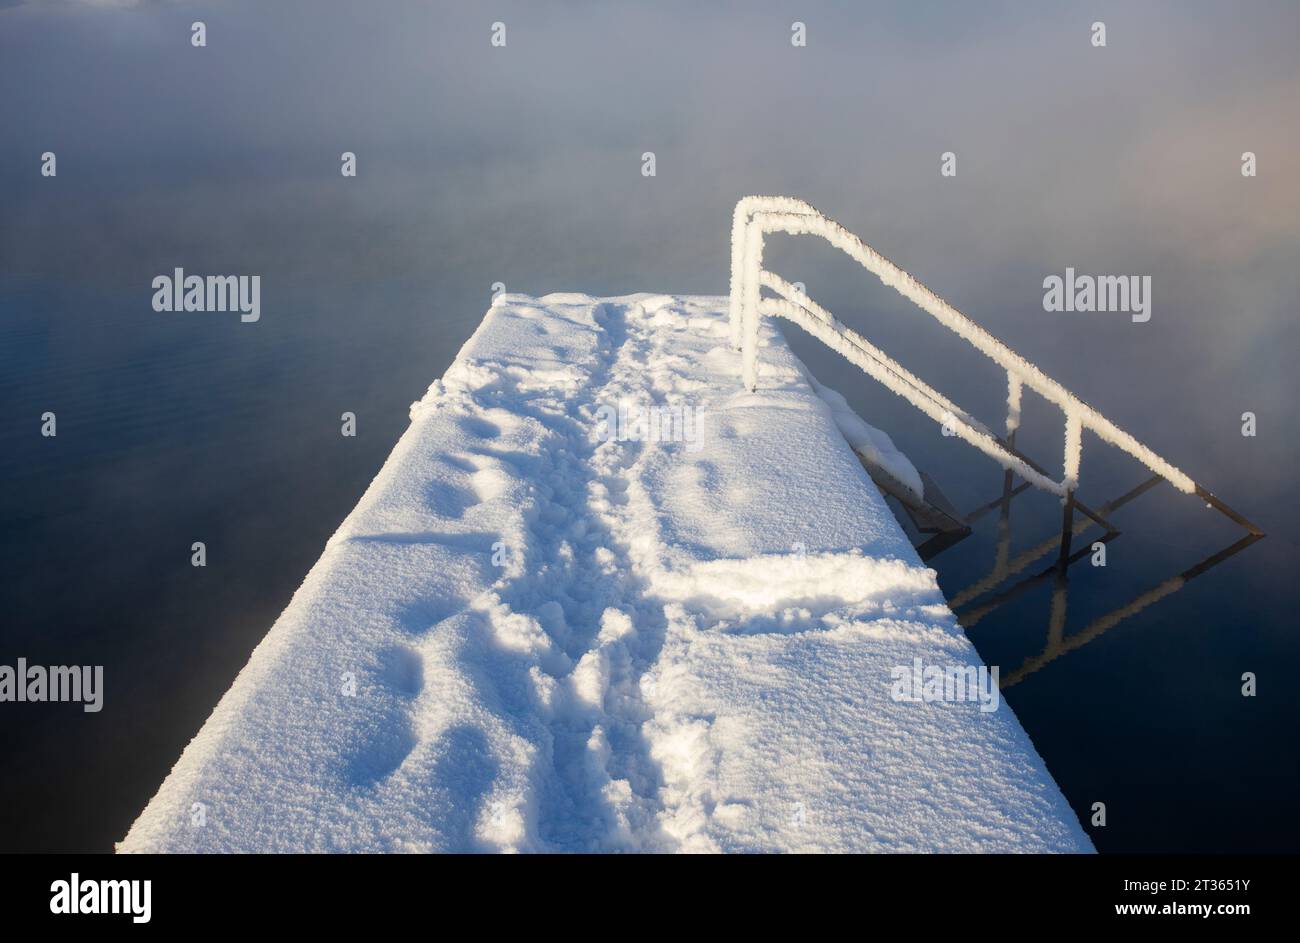 Austria, Upper Austria, Zell am Moos, Snow-covered jetty on shore of Irrsee lake Stock Photo